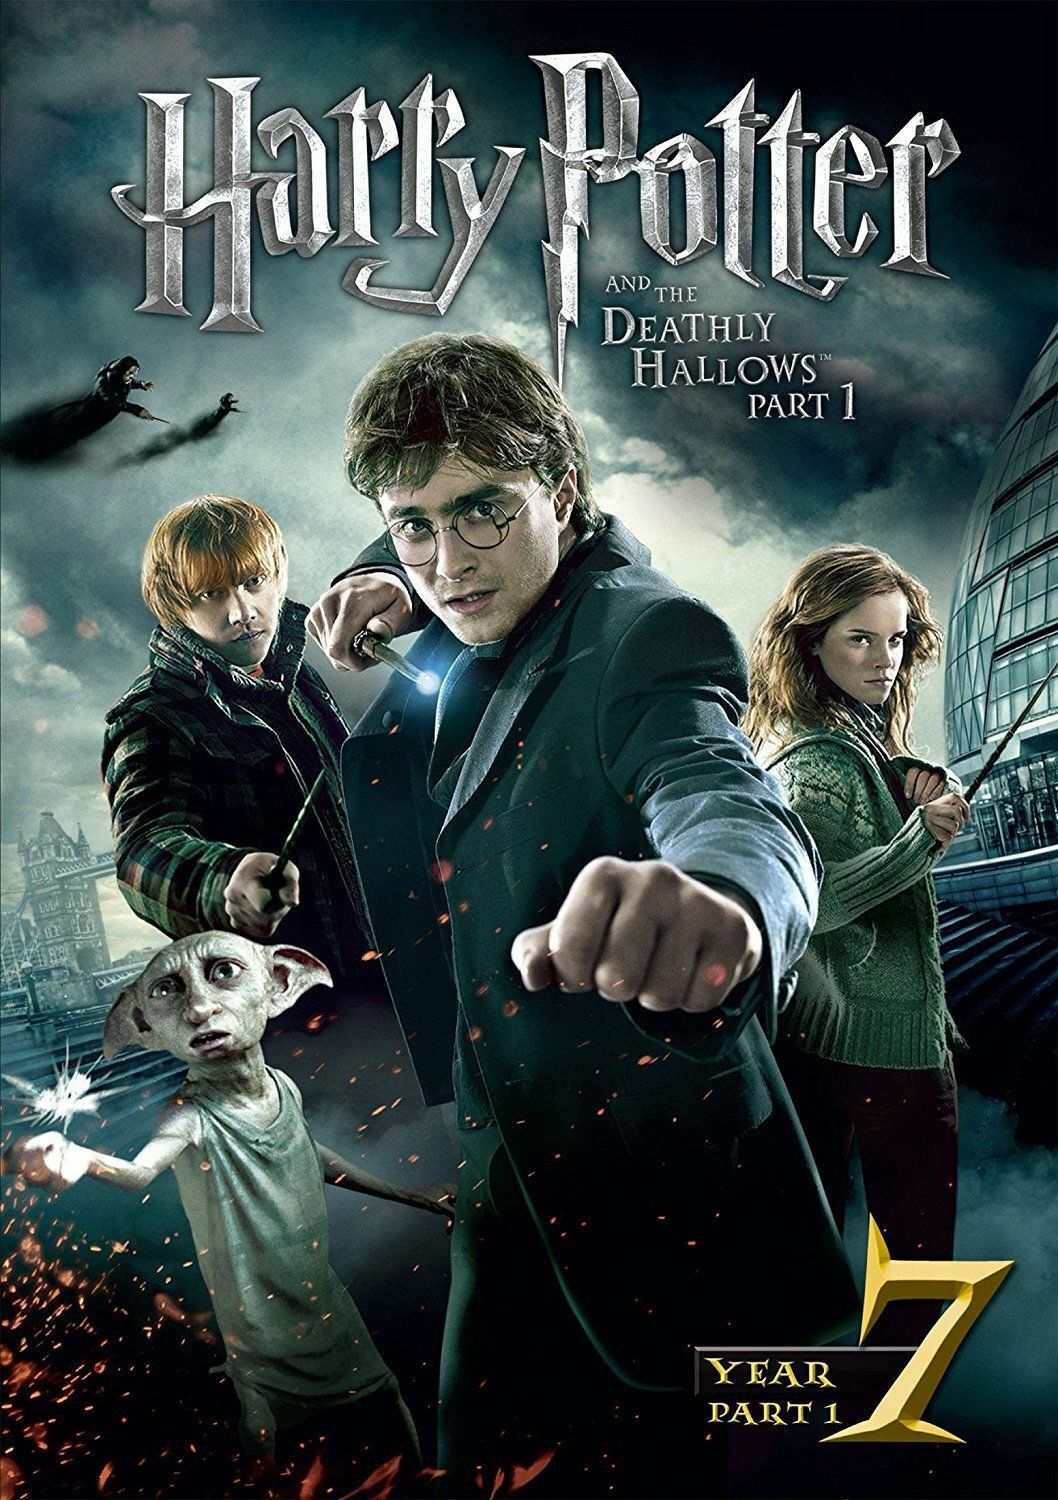 Harry Potter and the Deathly Hallows: Part 1 | The Harry Potter